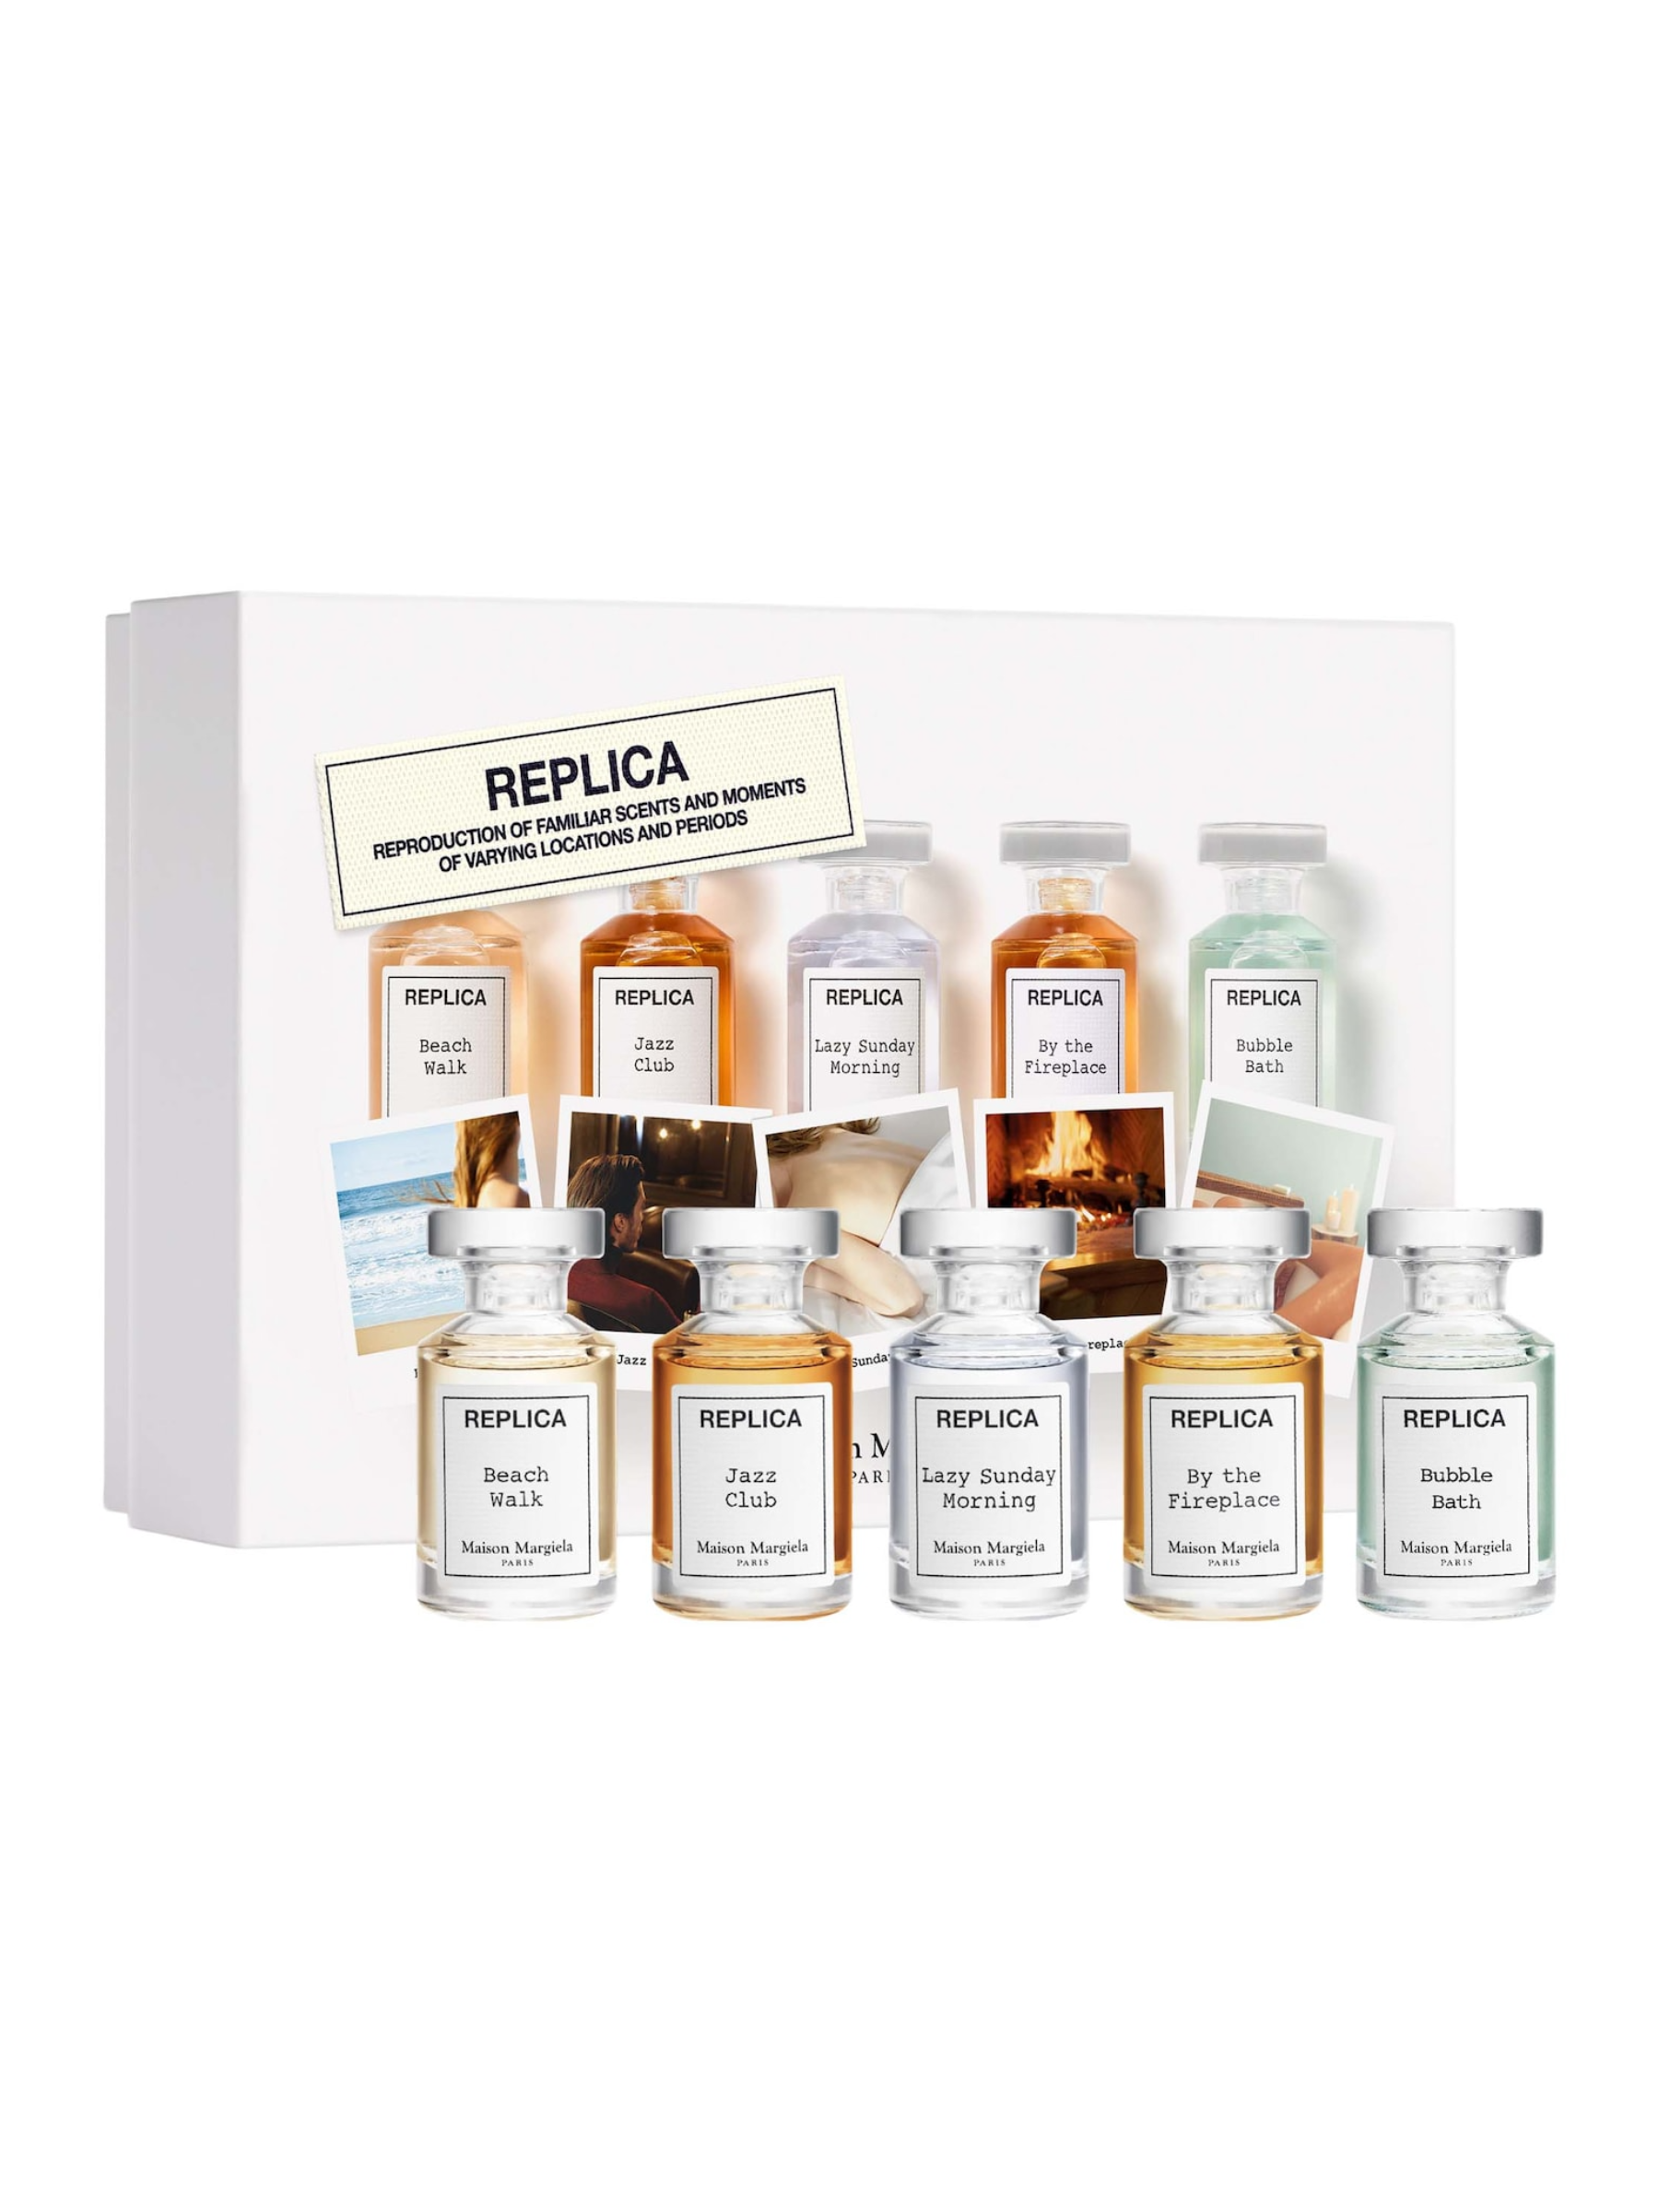 <p>If they're looking for their signature scent, this Margiela discovery set is exactly what they need. It includes fan-favorite Replica scents like By The Fire Place, Jazz Club, and Lazy Sunday Morning.</p> <p><em>Save when you shop for the best graduation ideas with these <a href="https://www.glamour.com/coupons/sephora?mbid=synd_msn_rss&utm_source=msn&utm_medium=syndication">Sephora promo codes</a></em>.</p> $75, Sephora. <a href="https://www.sephora.com/product/maison-margiela-replica-mini-coffret-set-P470042">Get it now!</a><p>Sign up for today’s biggest stories, from pop culture to politics.</p><a href="https://www.glamour.com/newsletter/news?sourceCode=msnsend">Sign Up</a>